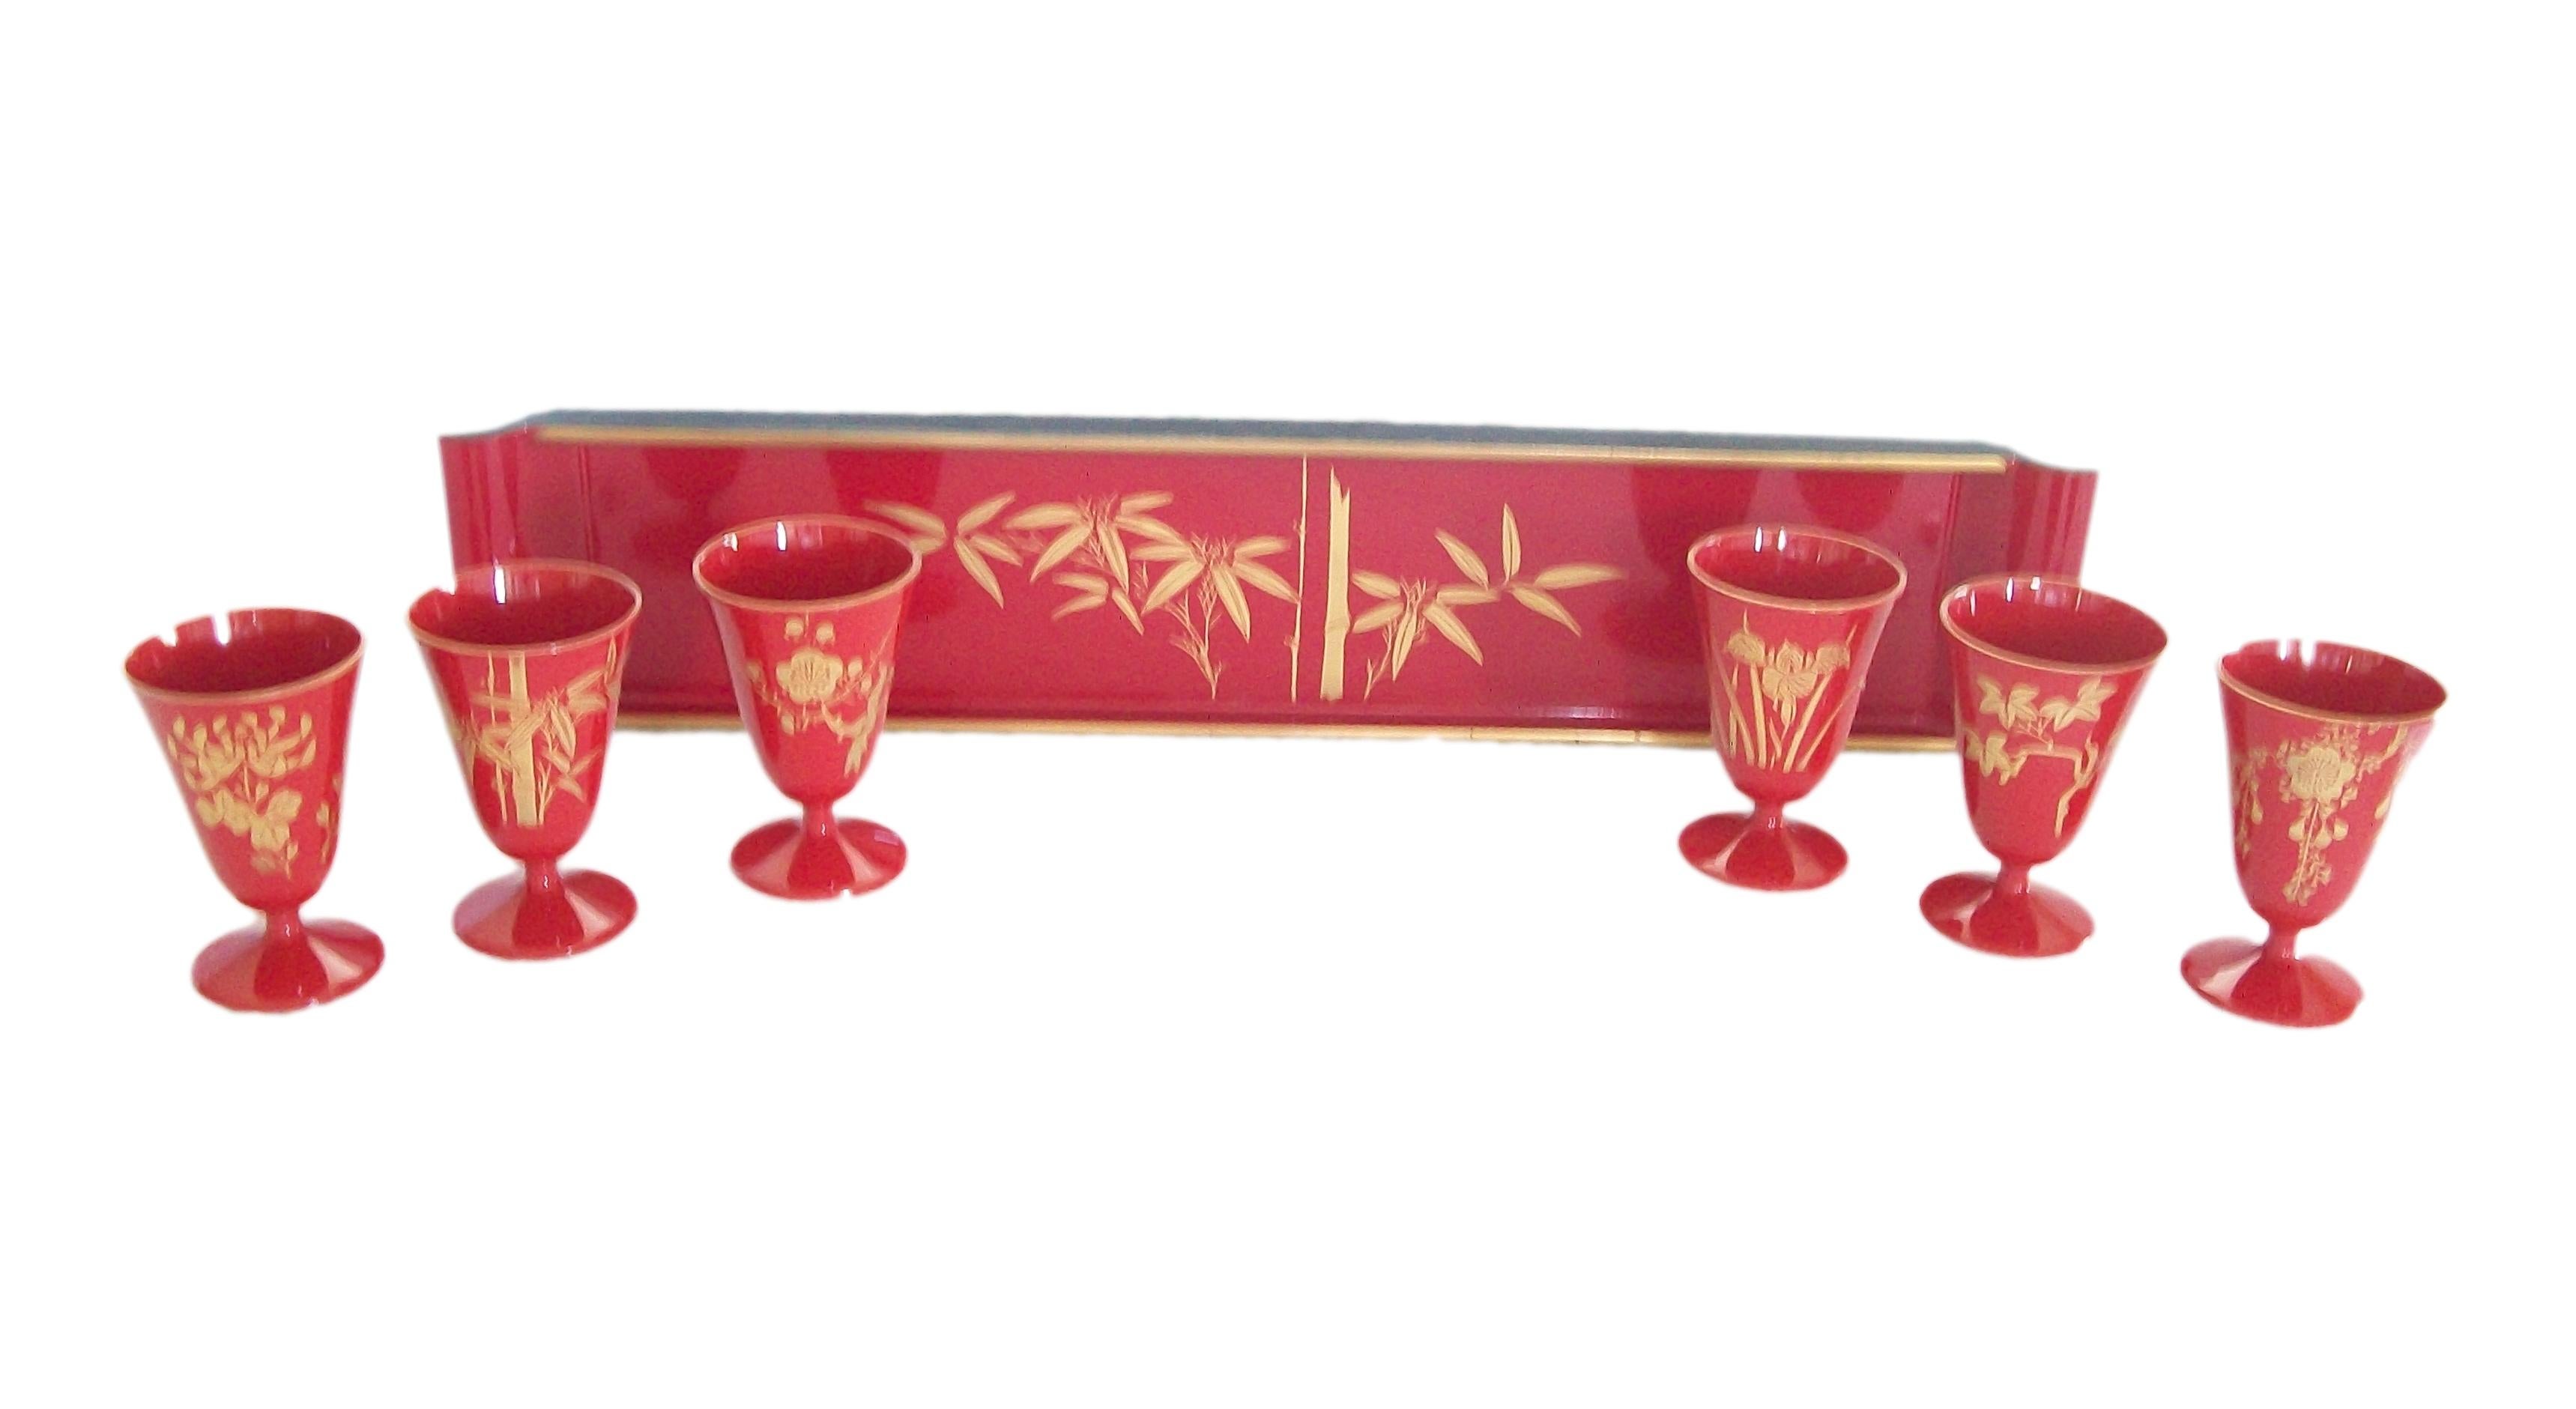 Japanese Vintage Urushi Red & Gilt Lacquer Tray & Six Cups with Box - Japan - Mid 20th C. For Sale